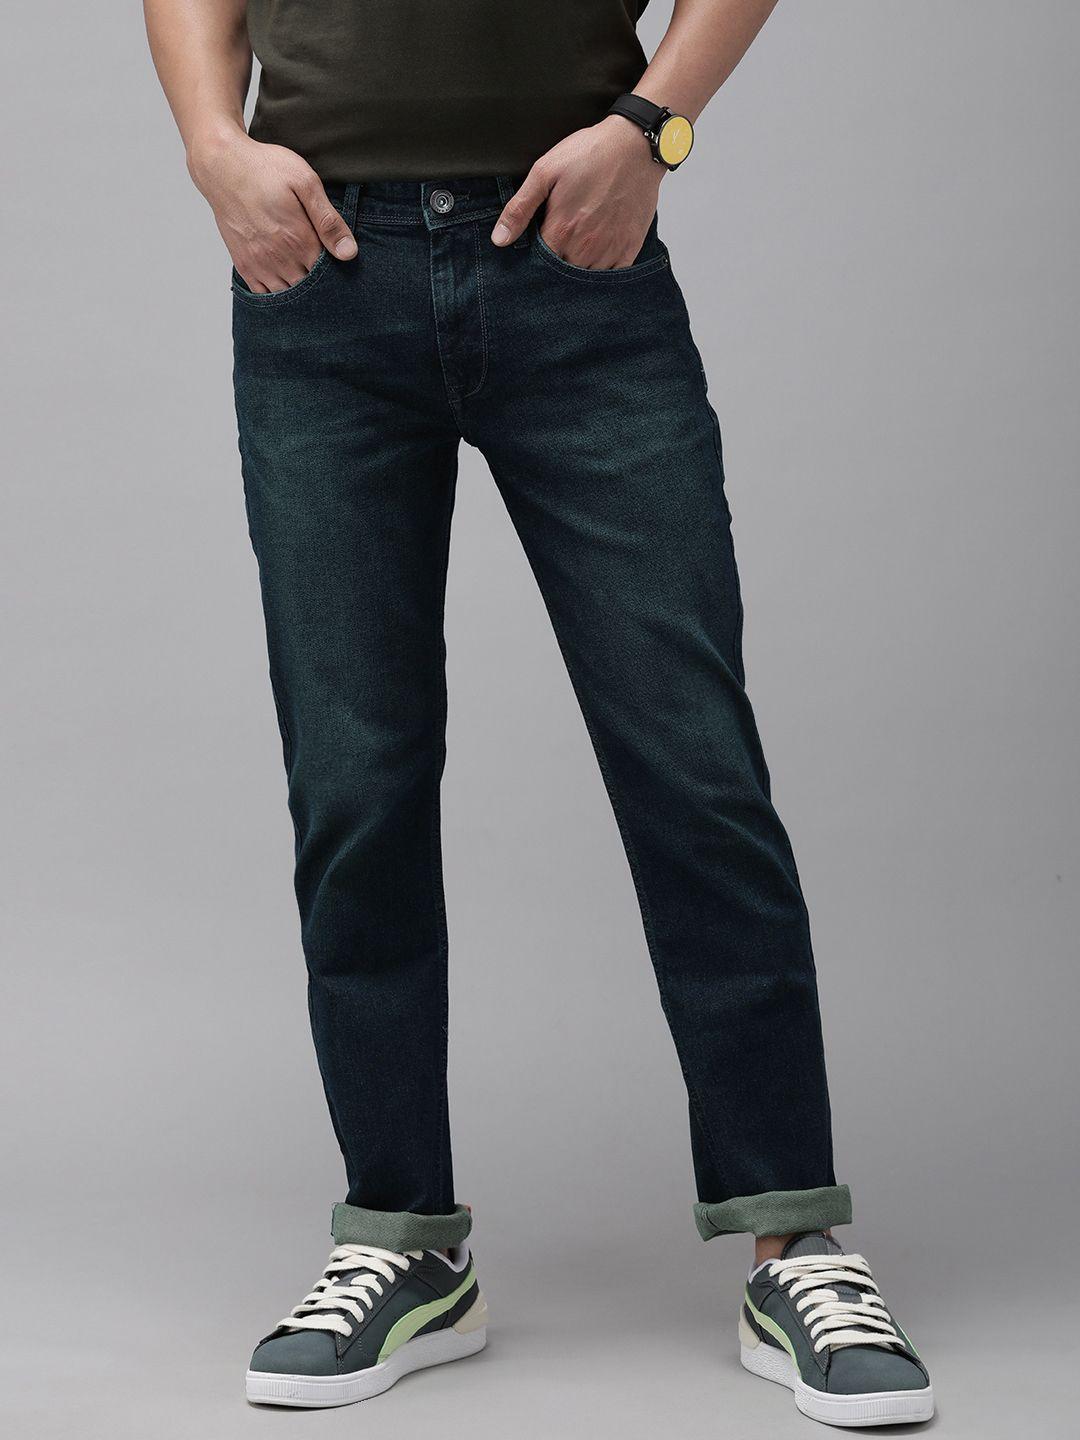 beat london by pepe jeans men blue light fade stretchable jeans